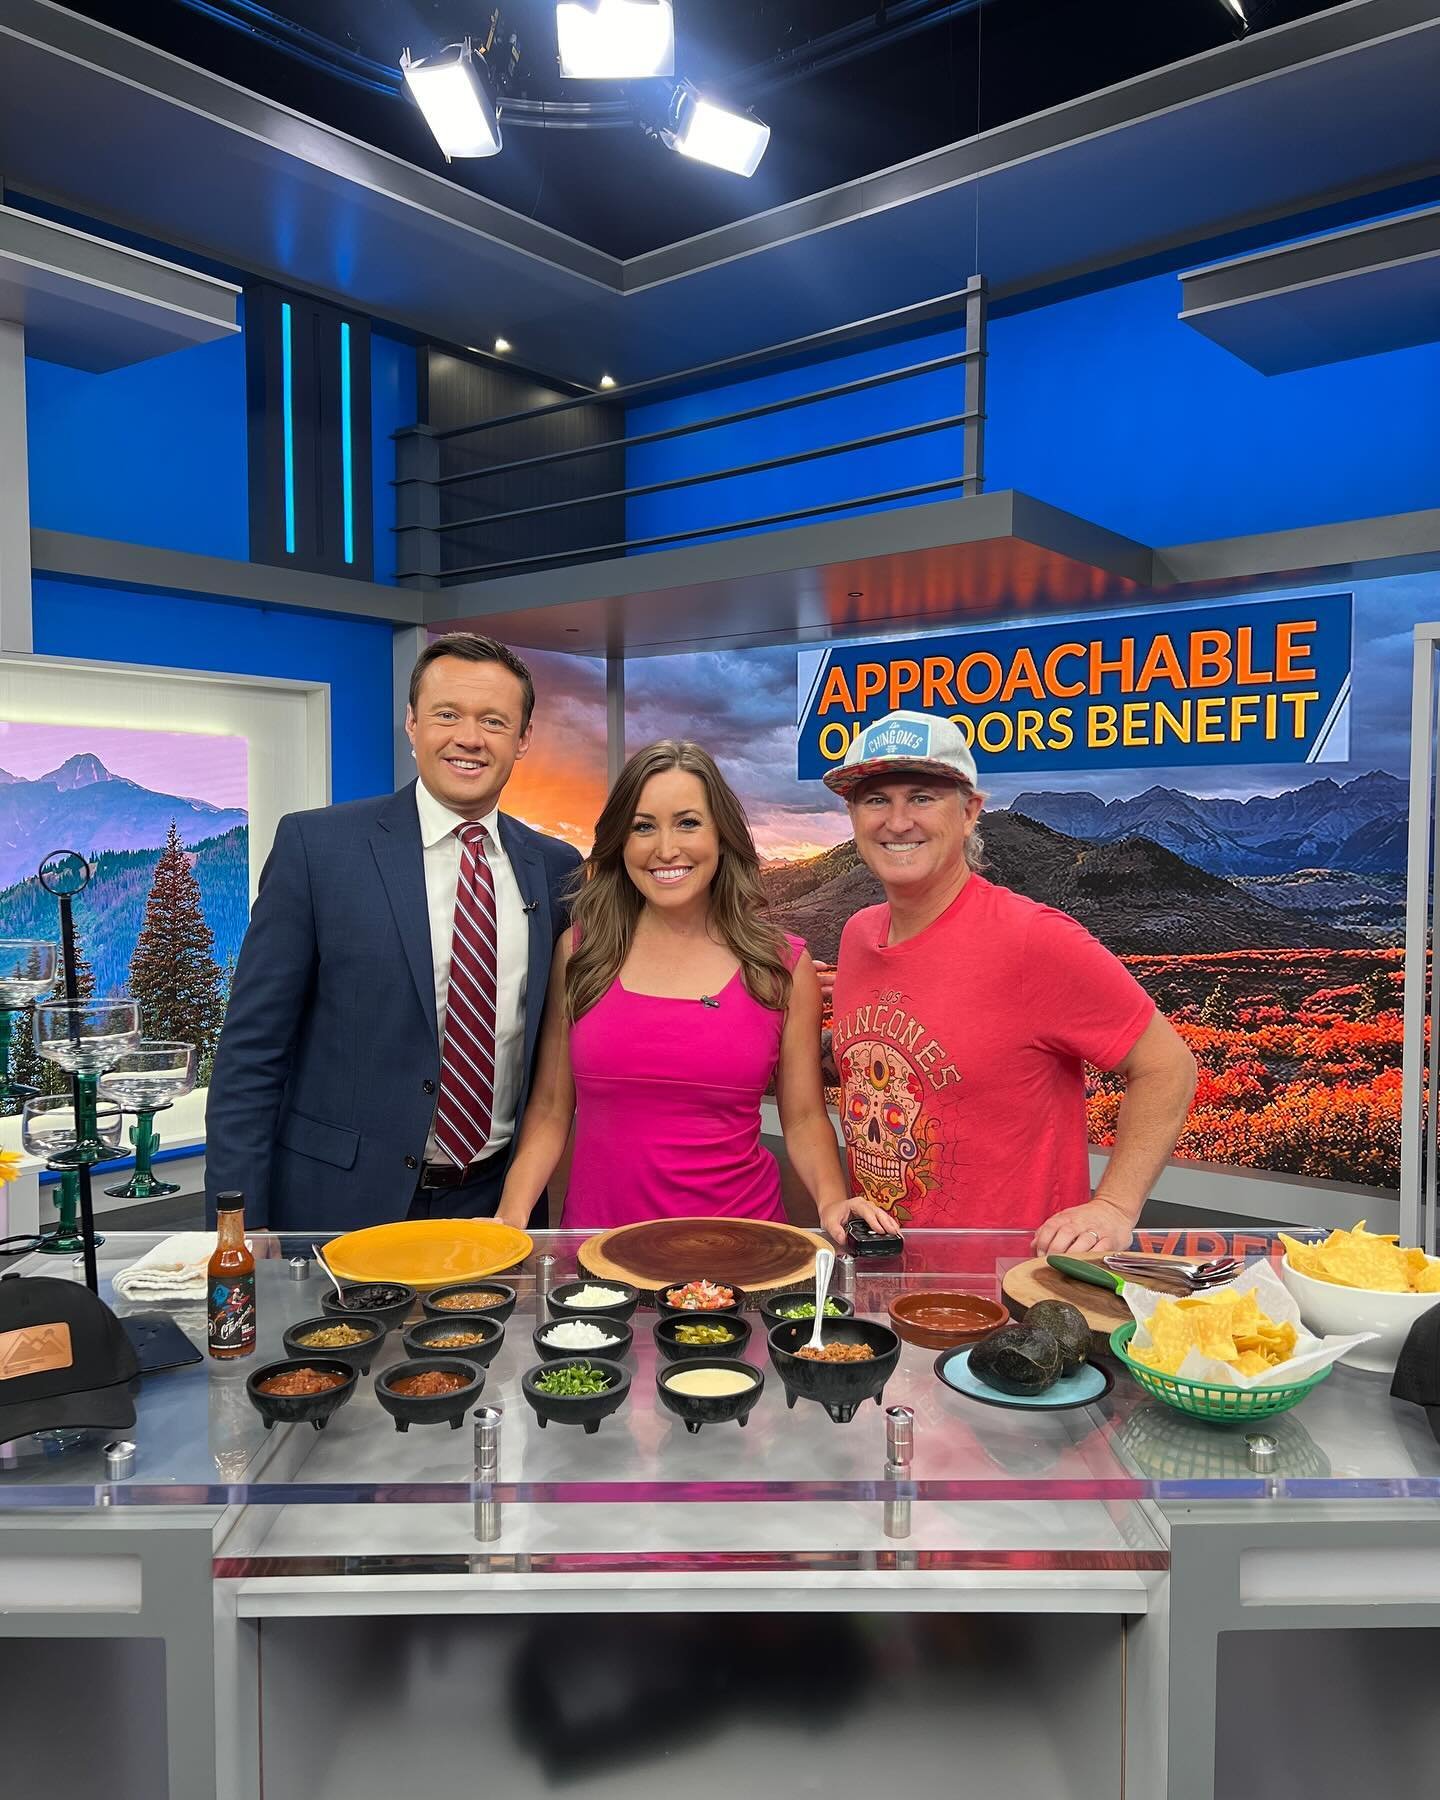 It&rsquo;s that time of year again! Don&rsquo;t miss out on a chance to have a Los Chingones fun time while giving back to a great cause! Proceeds from the @approachableoutdoors summer benefit bash will be donated to @morganadamsfdn which helps fund 